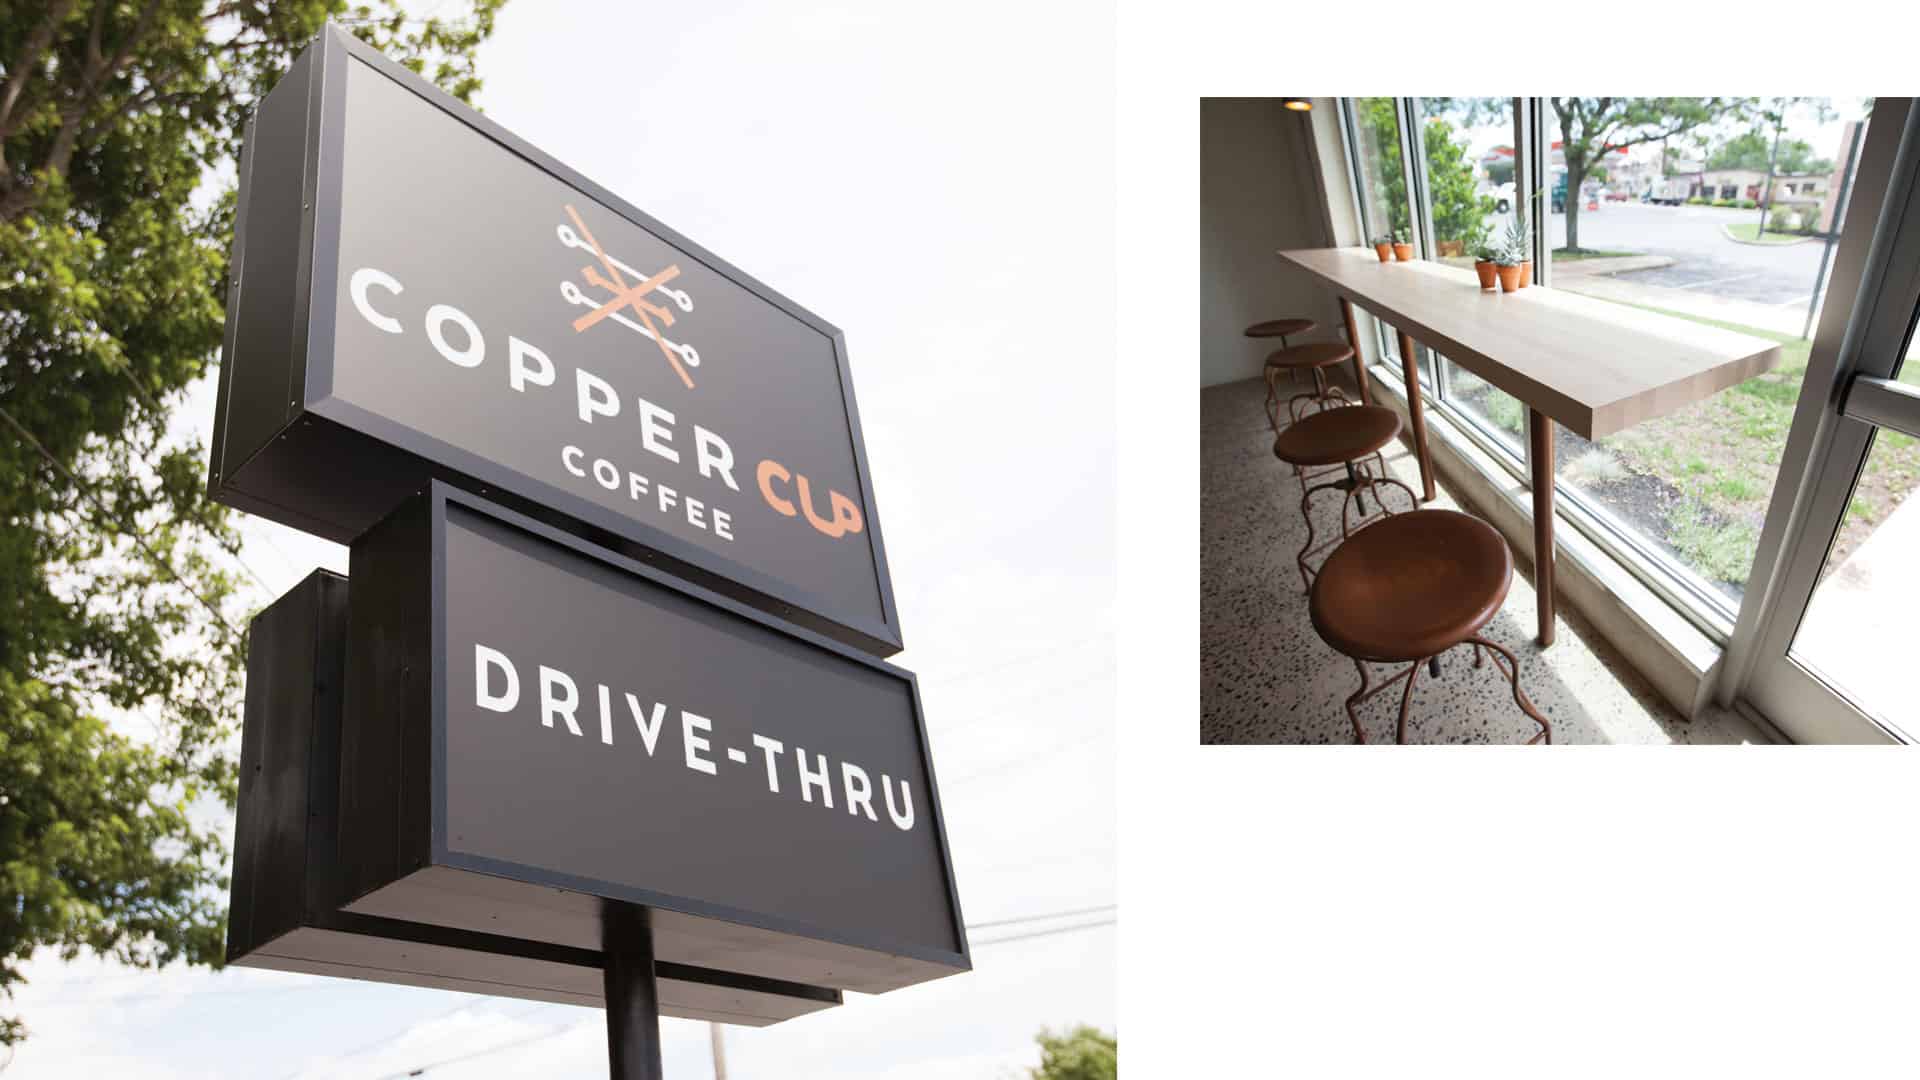 Copper Cup Coffee Company restaurant and cafe branding and concept development